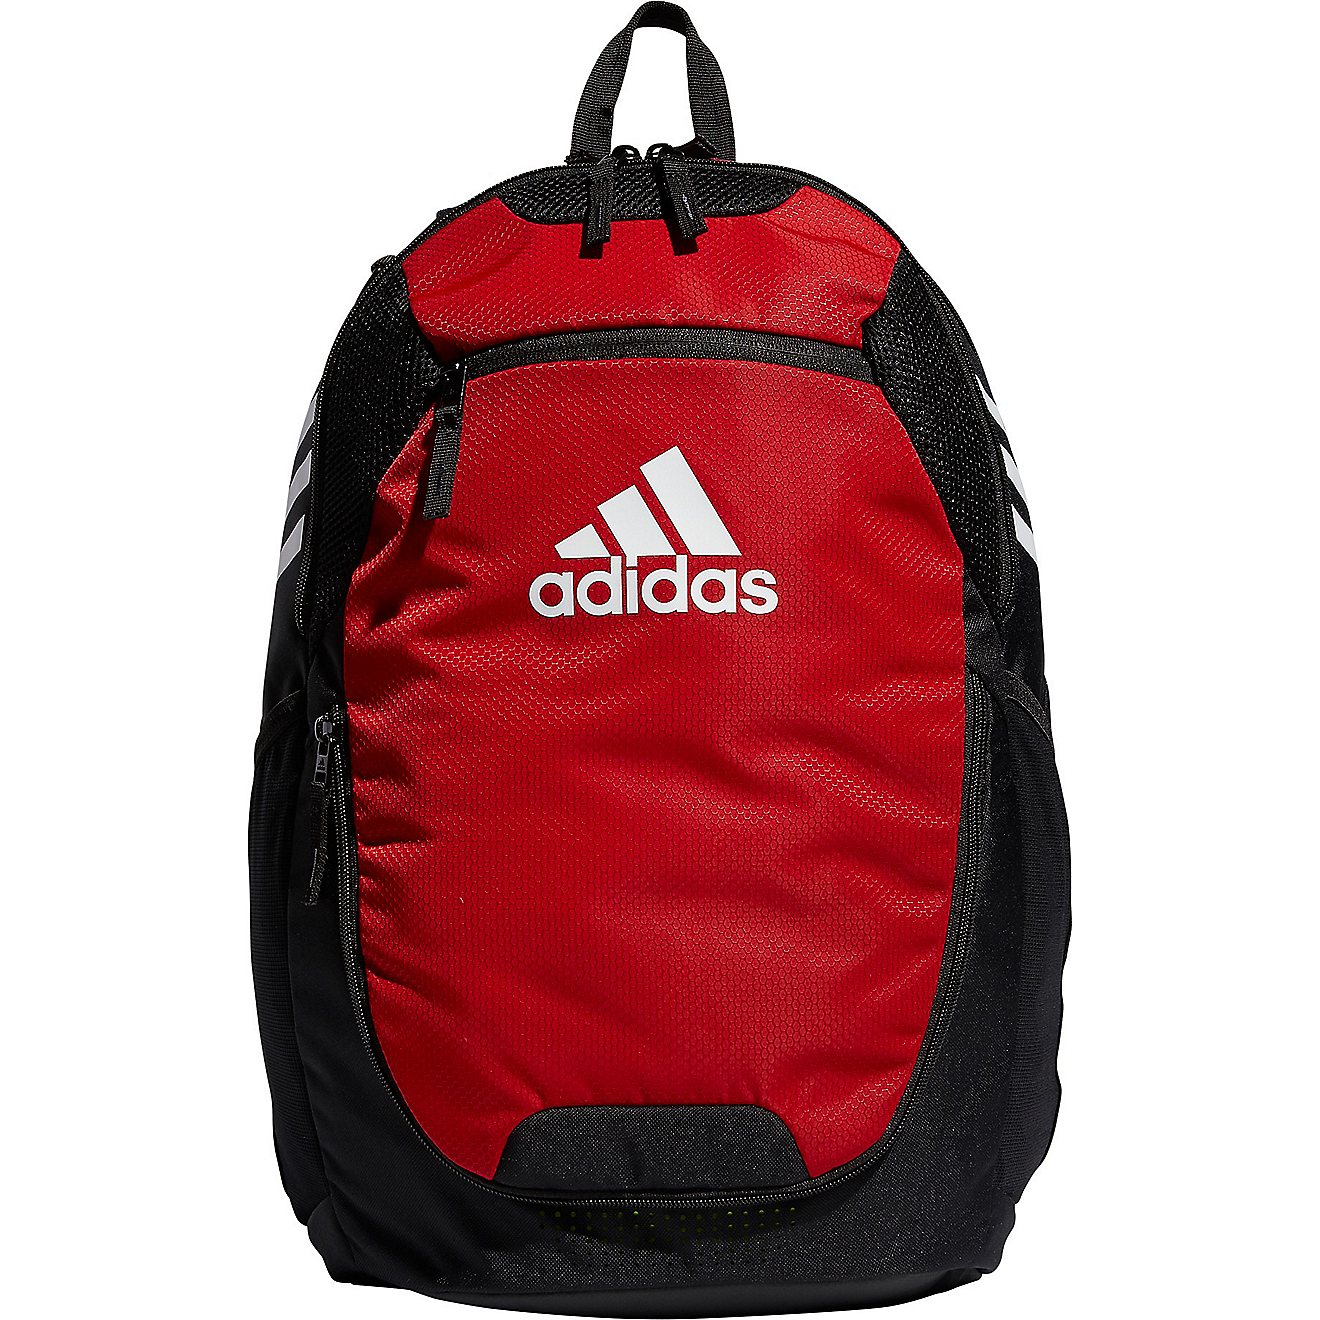 adidas Stadium Soccer Backpack                                                                                                   - view number 1